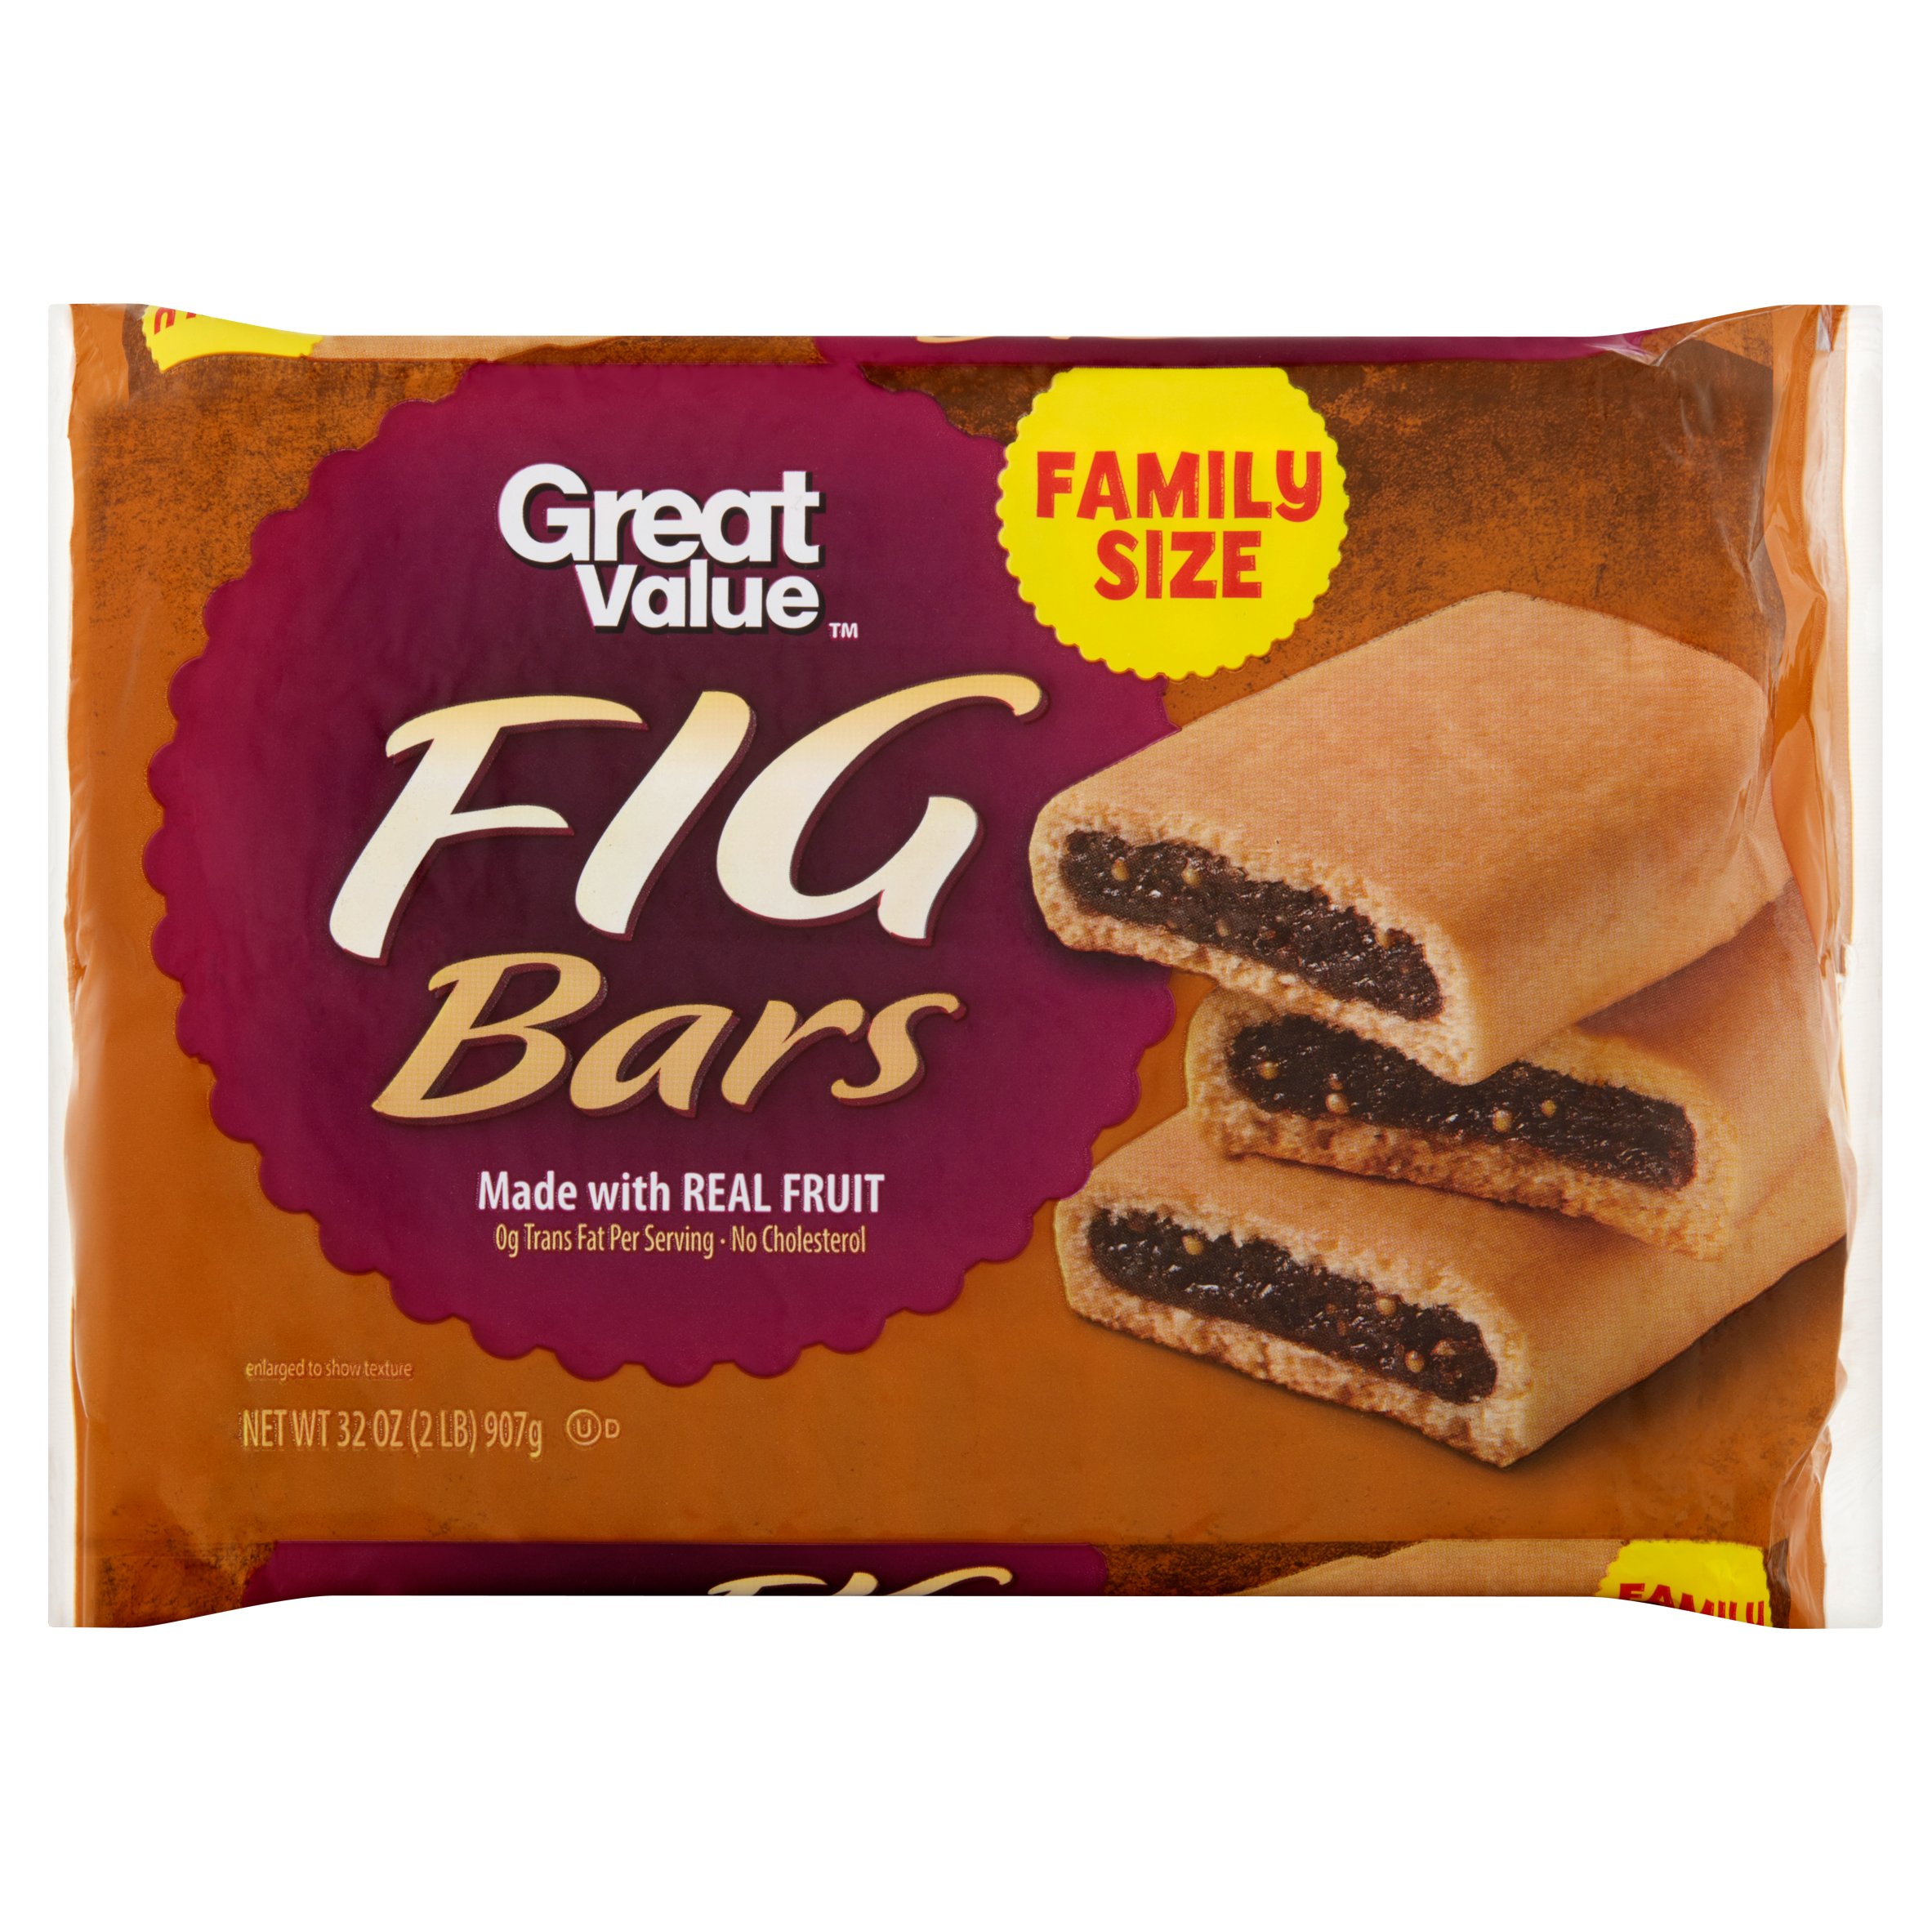 (3 Pack) Great Value Fig Bars, Family Size, 32 Oz